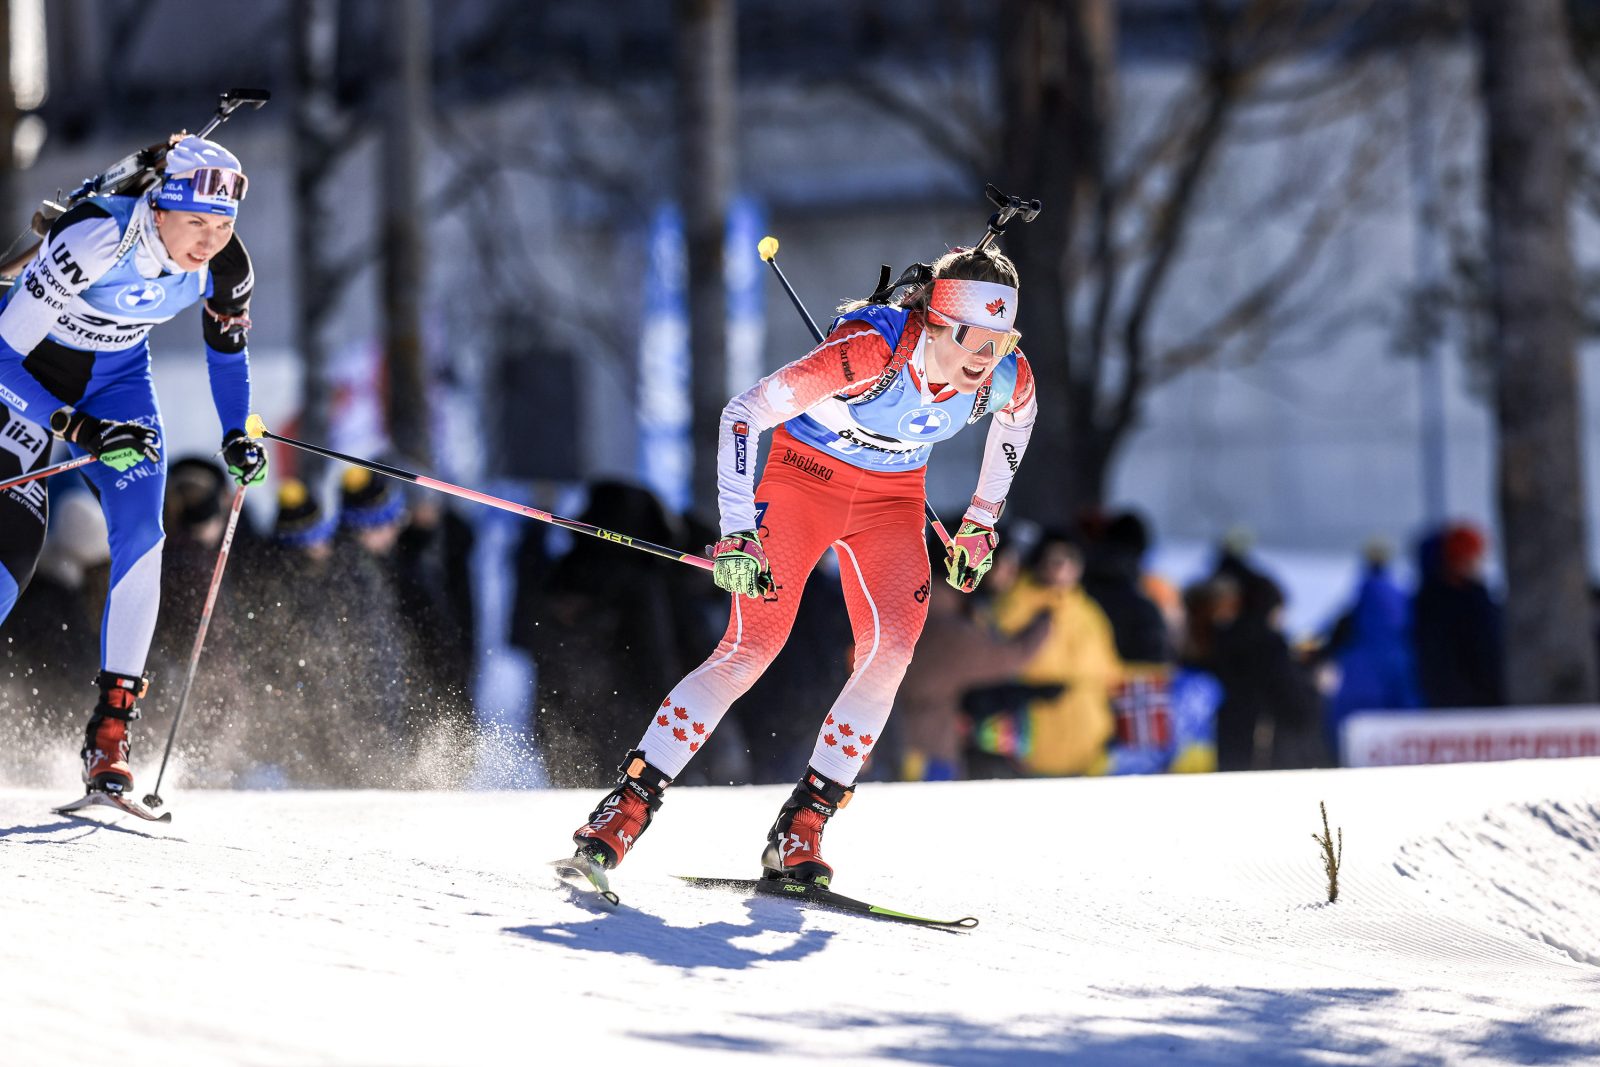 Two women, one wearing blue and one wearing red (representing Canada), race in the snow on cross-country skis during a world competition in biathlon.